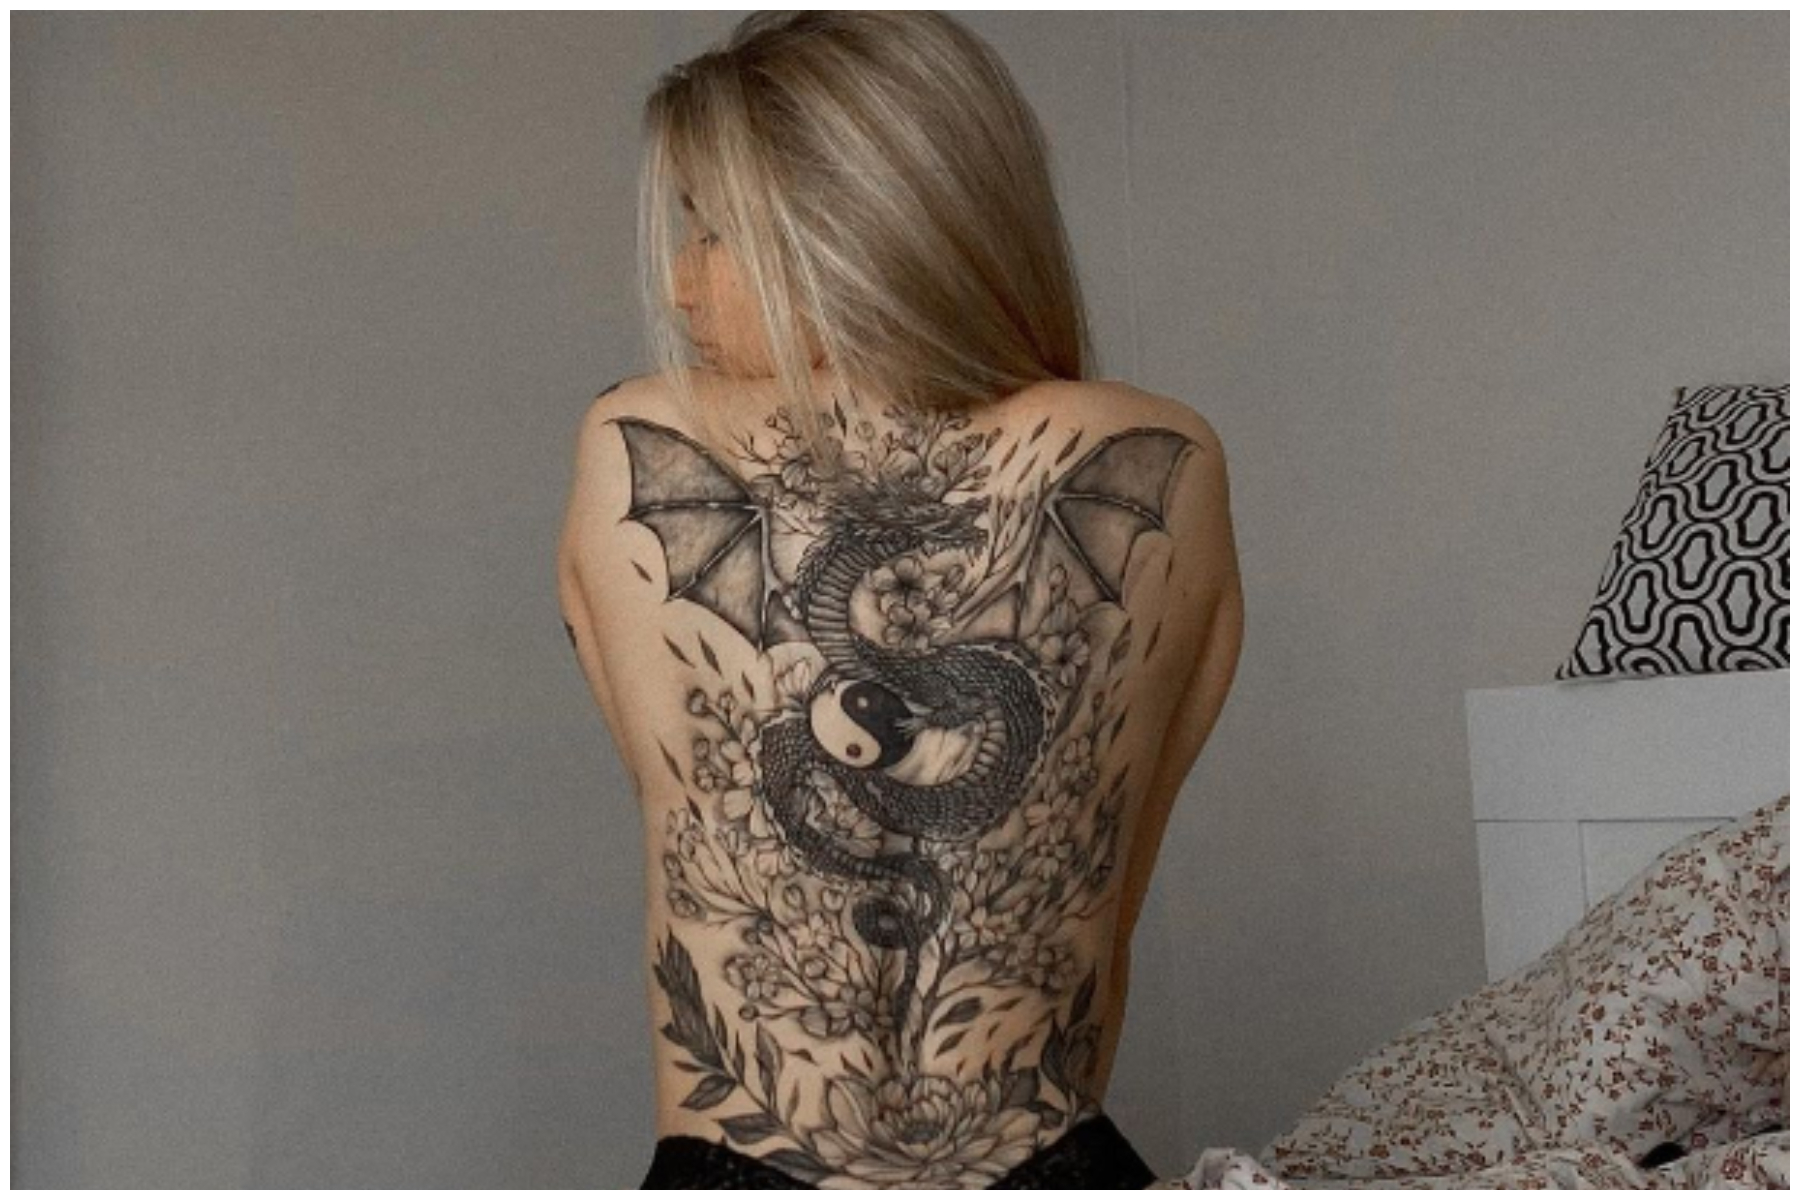 MSport - Which footballer has the best back tattoos? 🤔 1.... | Facebook